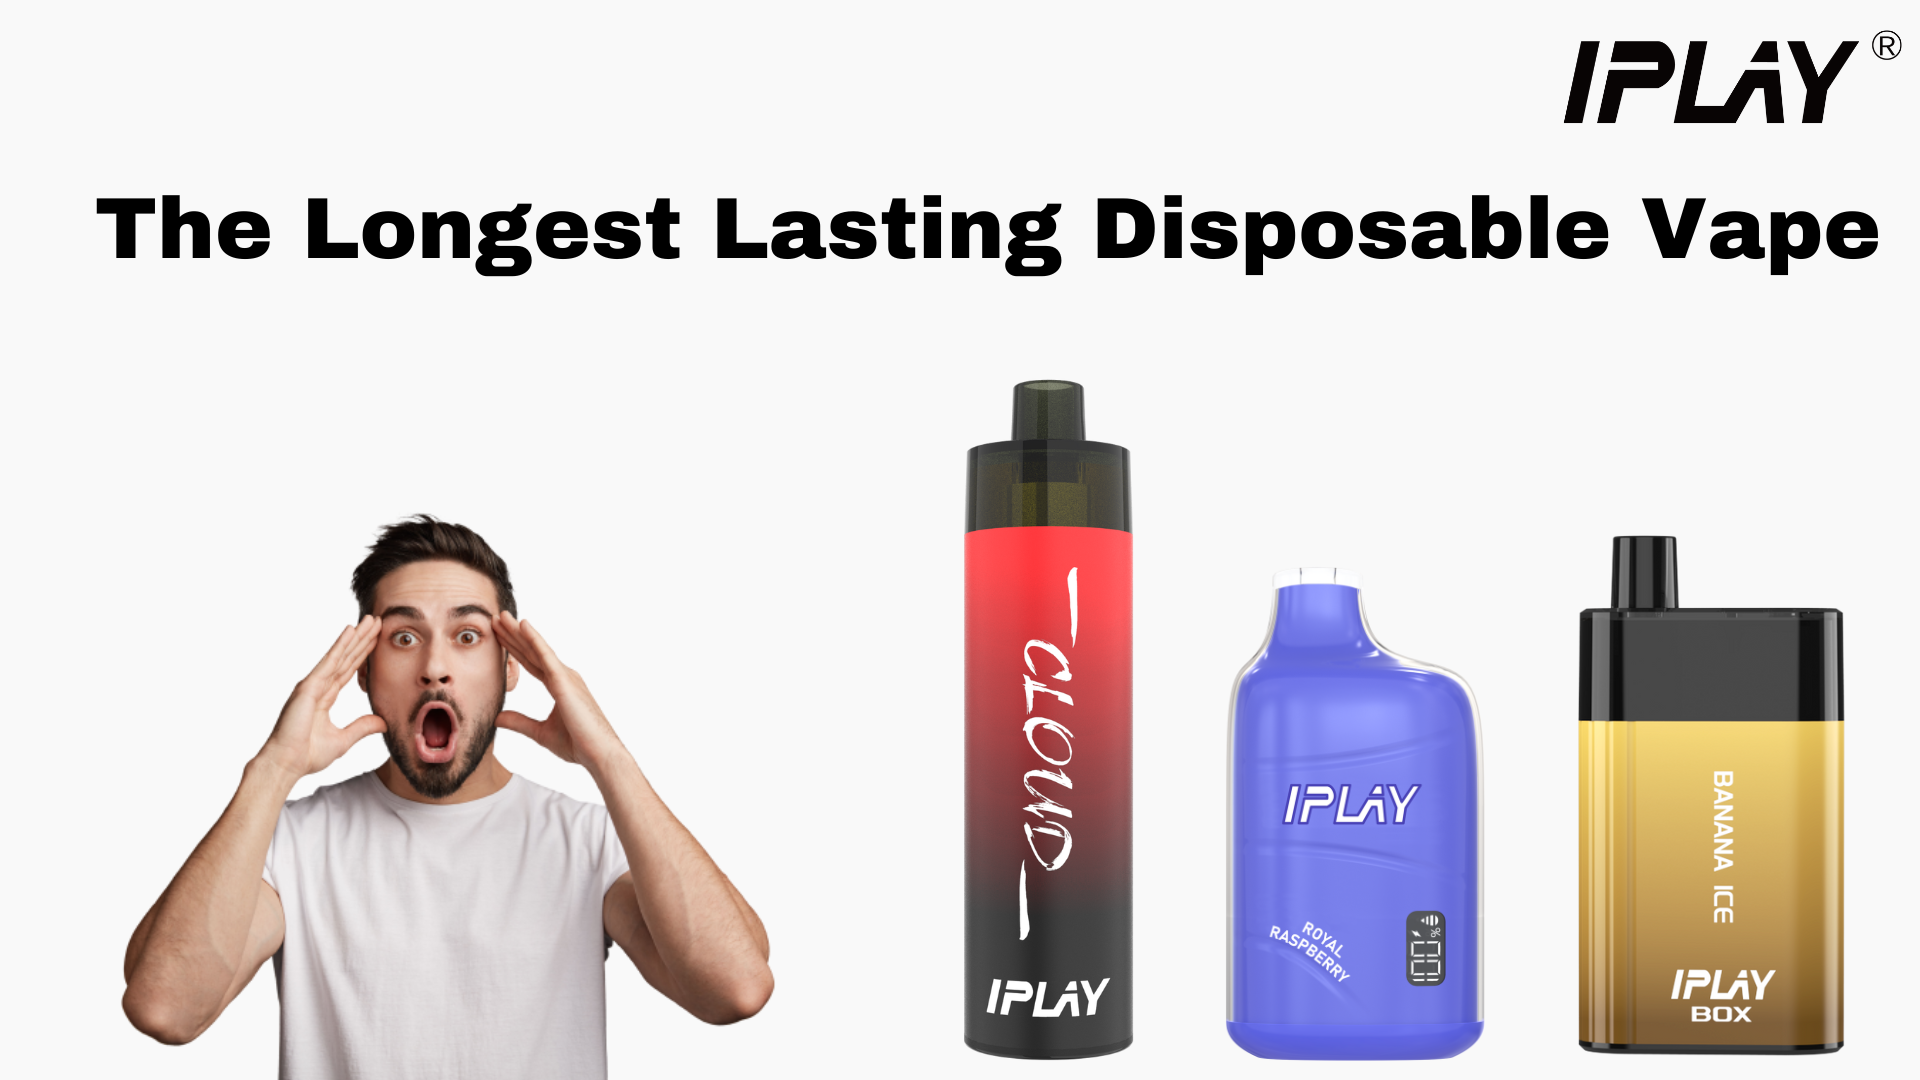 What Is the Longest Lasting Disposable Vape